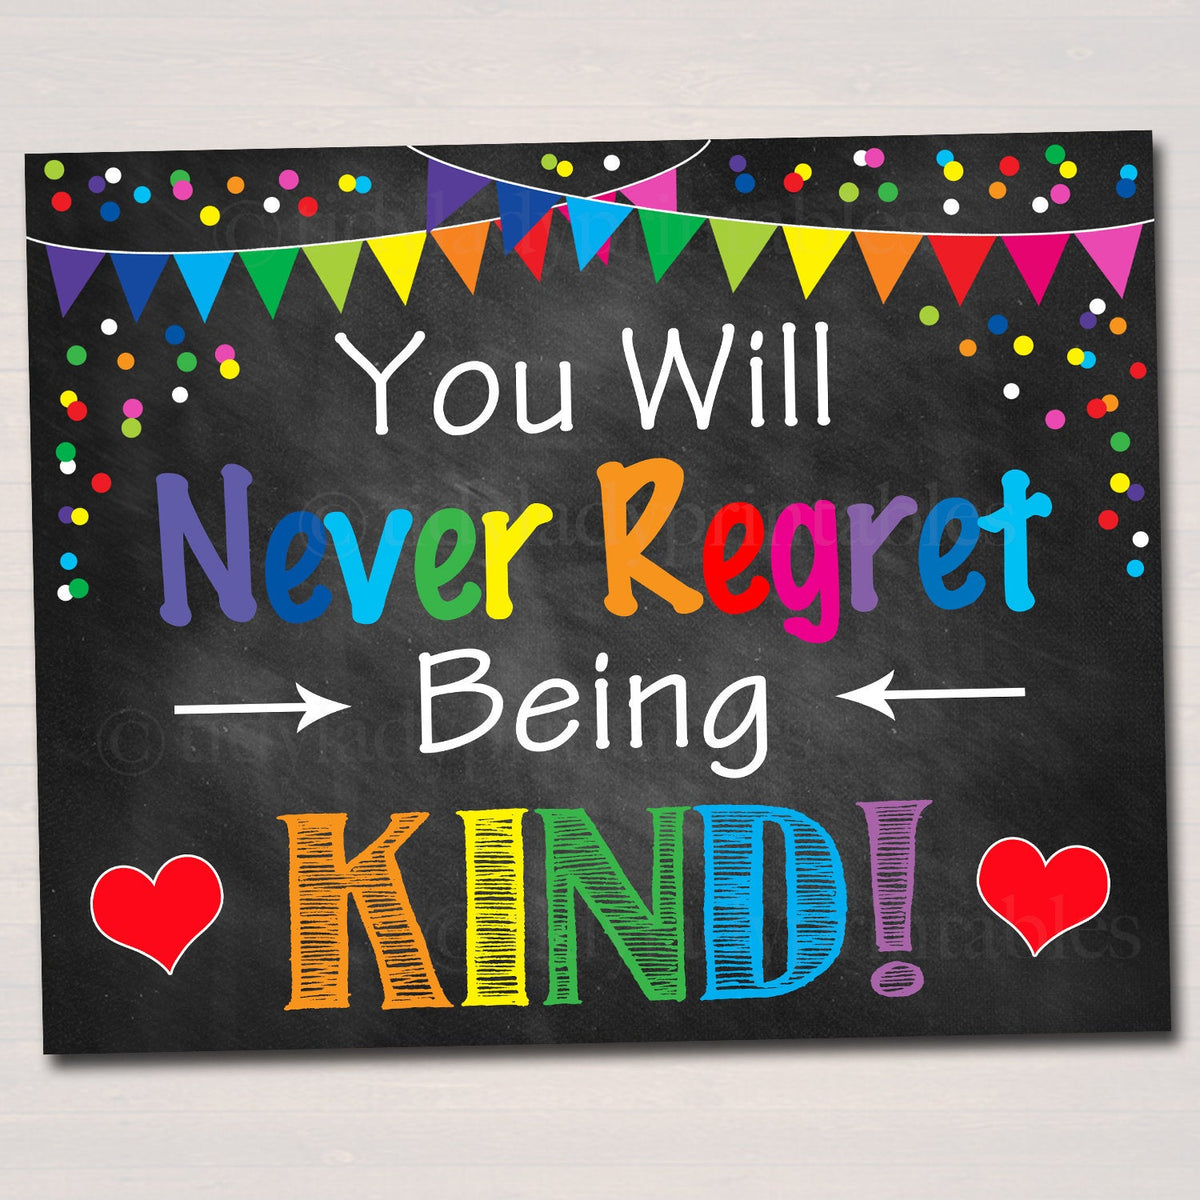 Classroom Kindness Poster